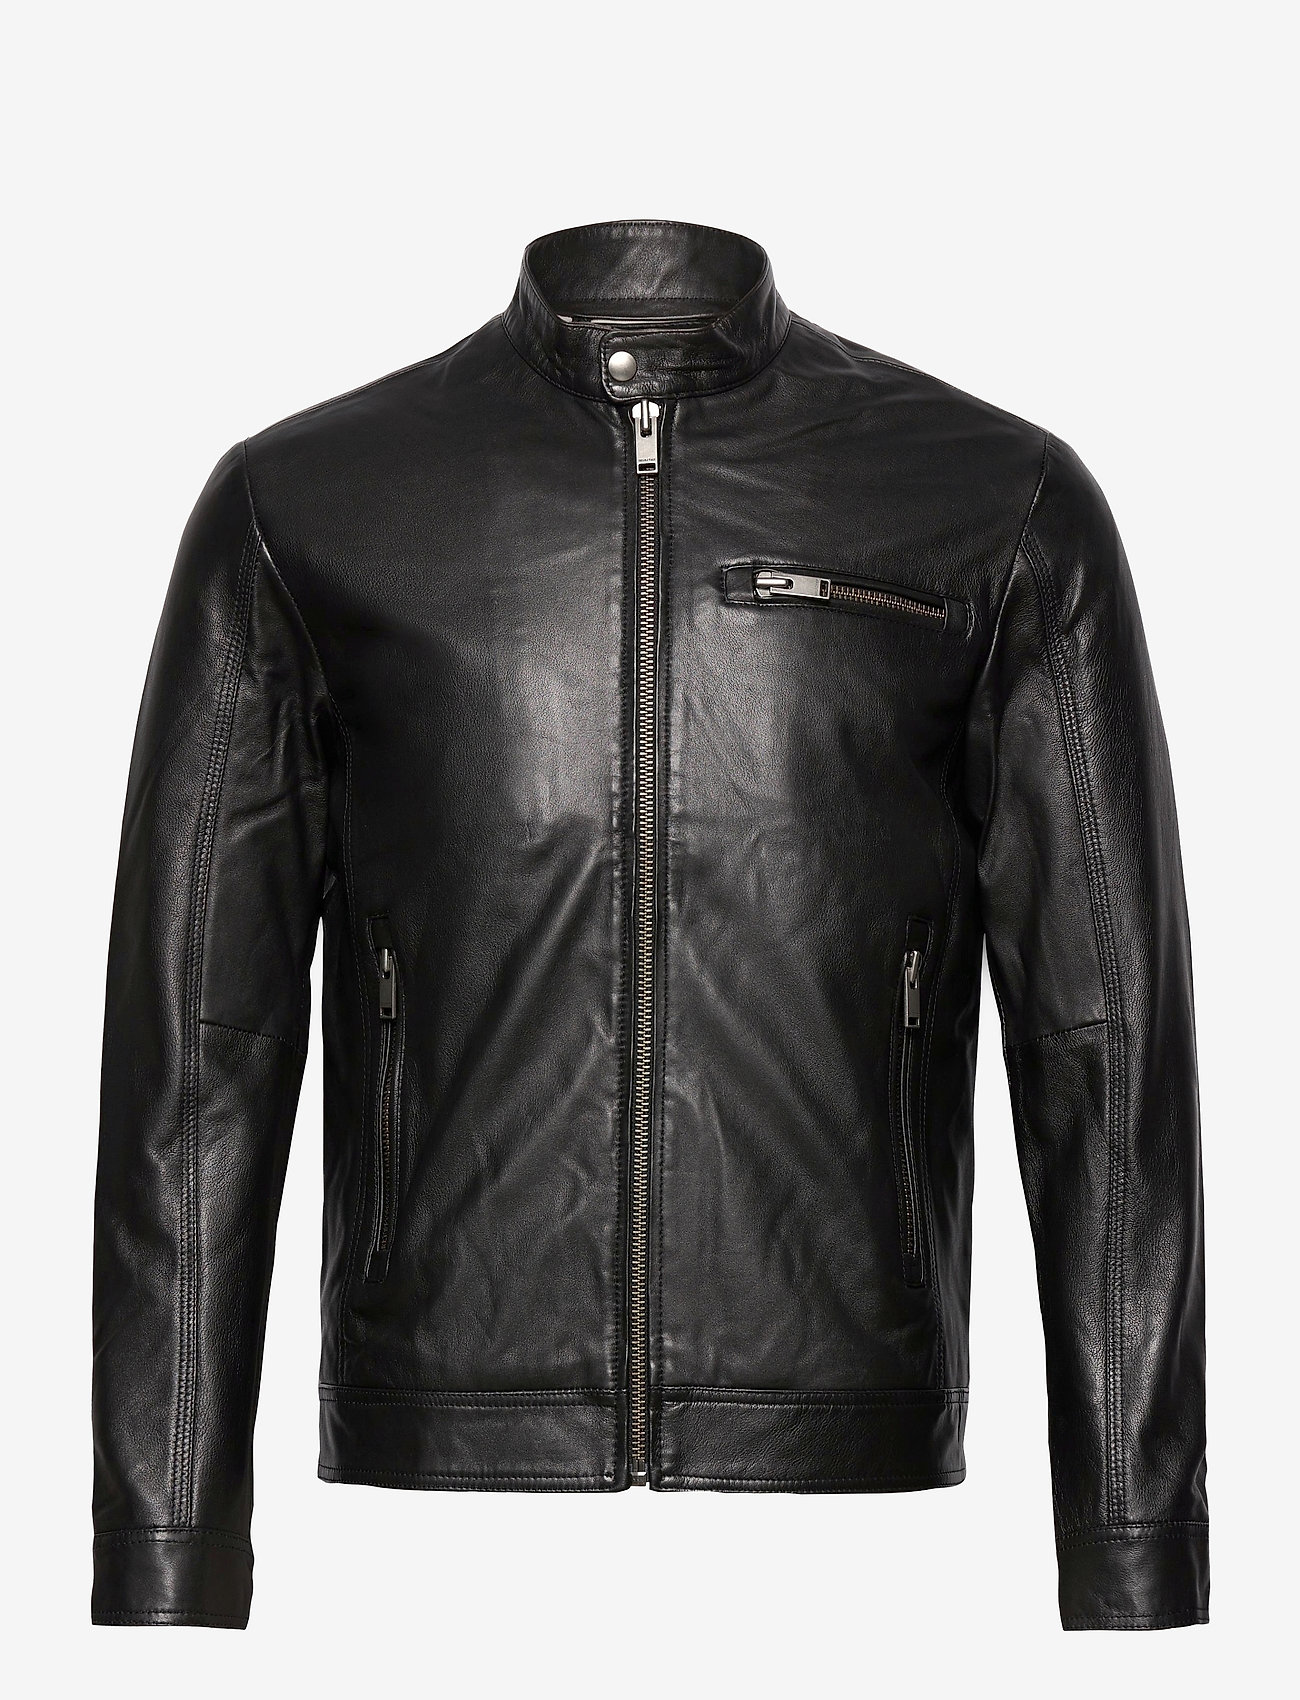 Australia Digital Control Selected Homme Slhiconic Classic Leather Jkt W - 172.49 €. Buy Leather  Jackets from Selected Homme online at Boozt.com. Extended returns – January  31st